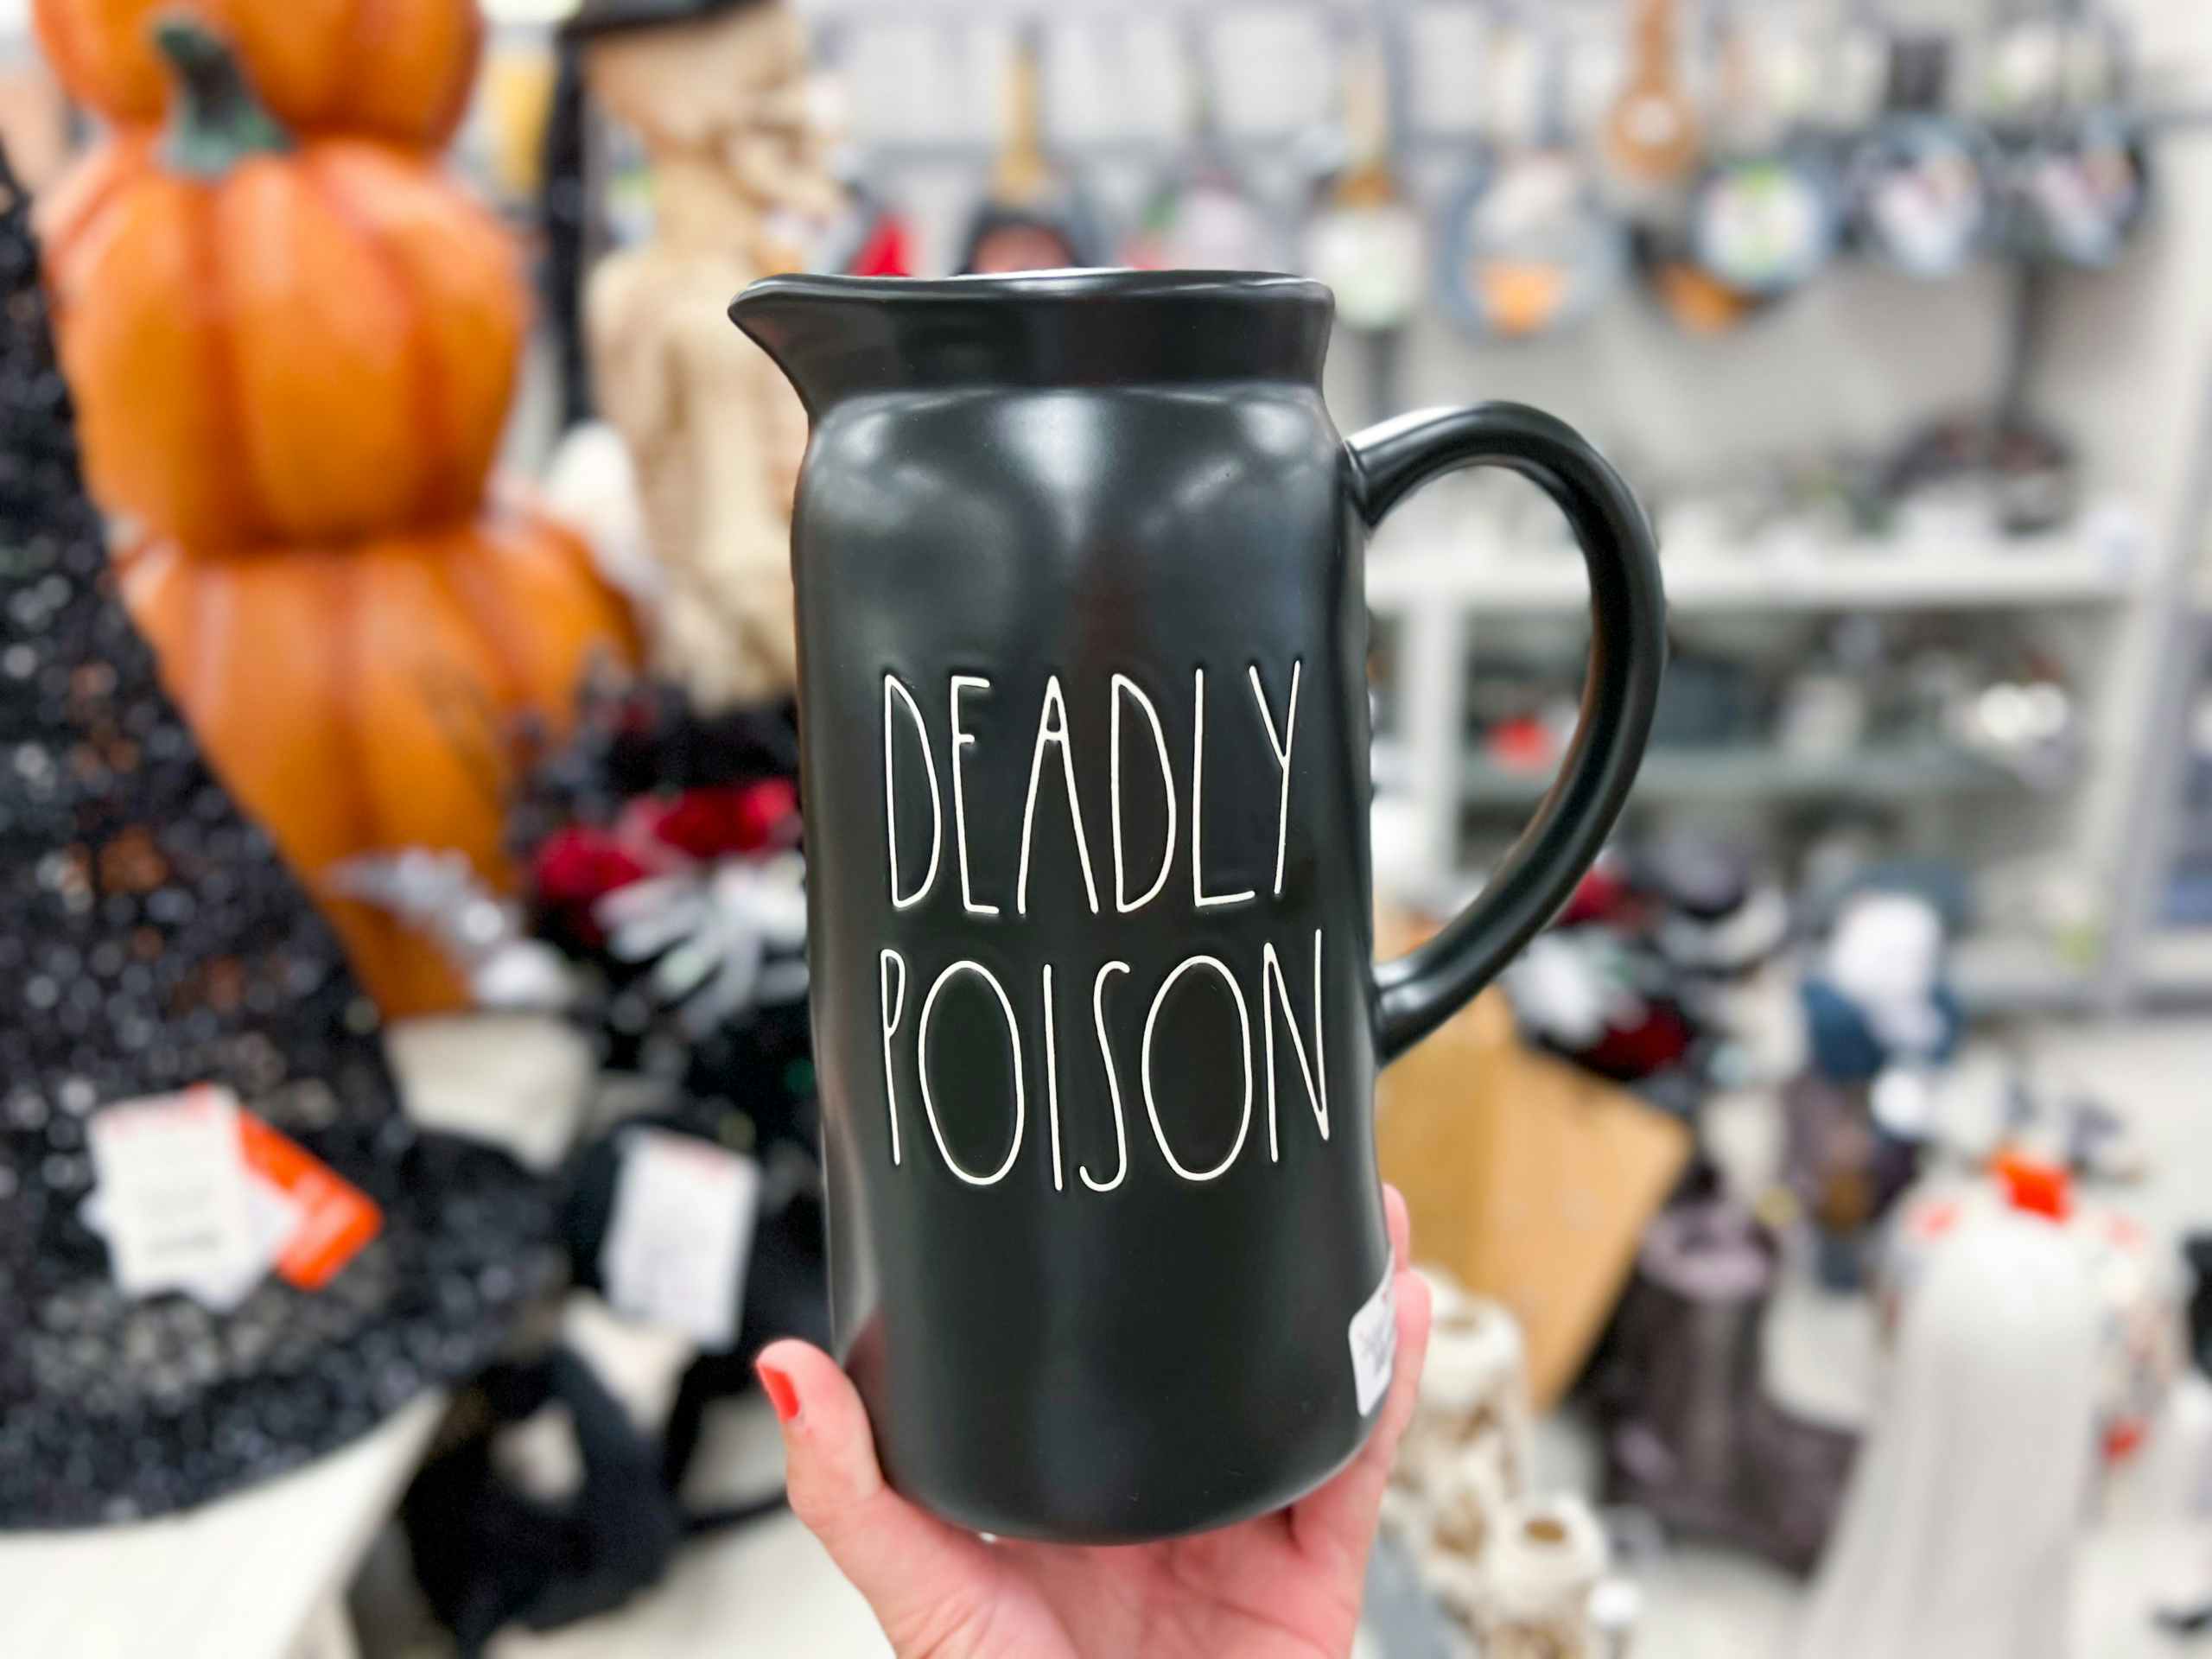 hand holding up a black rae dunn pitcher that says "deadly poison